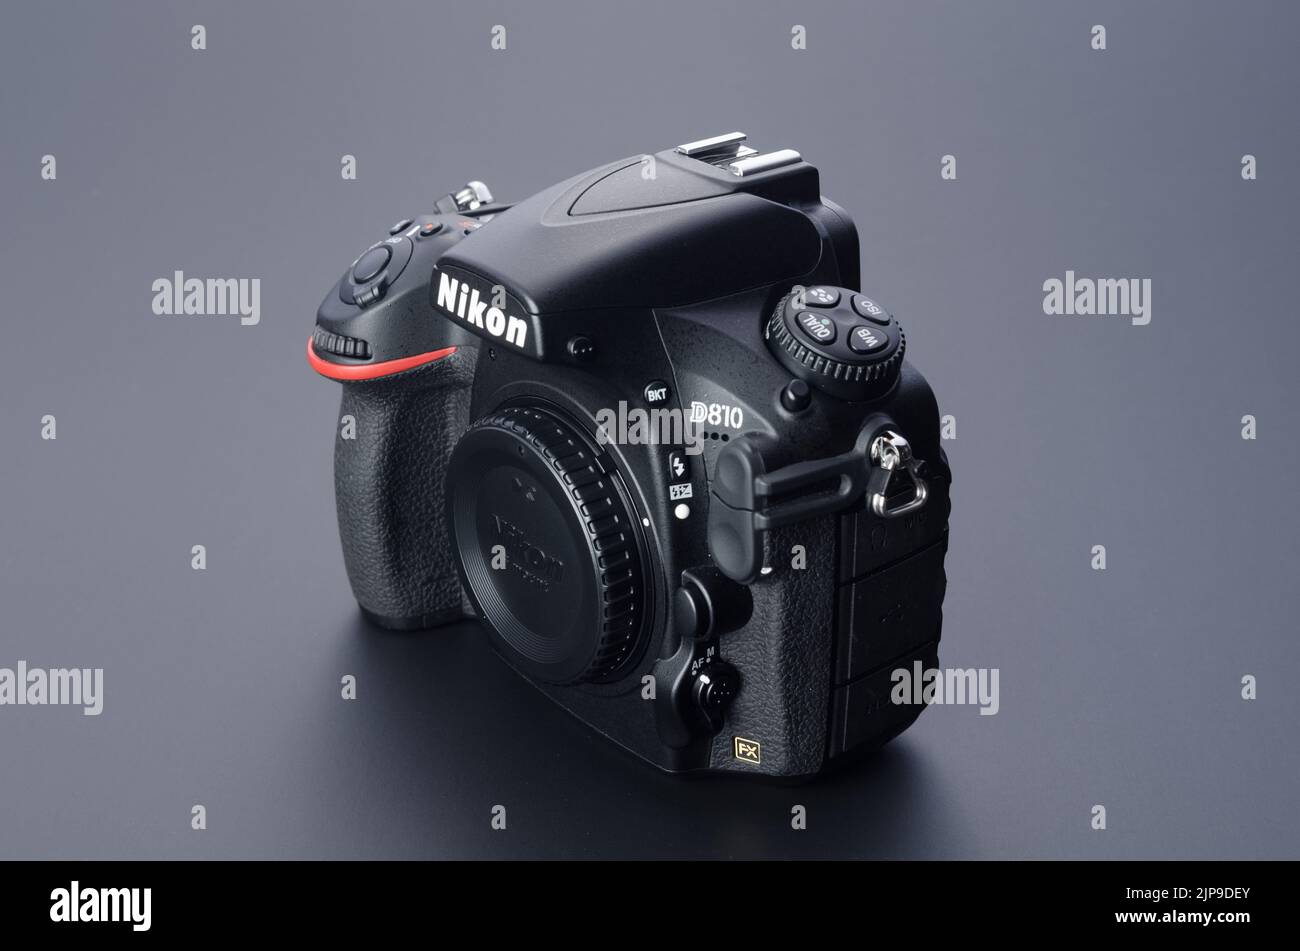 Nikon D810 professional DSLR digital camera without lens attached on dark  background Stock Photo - Alamy